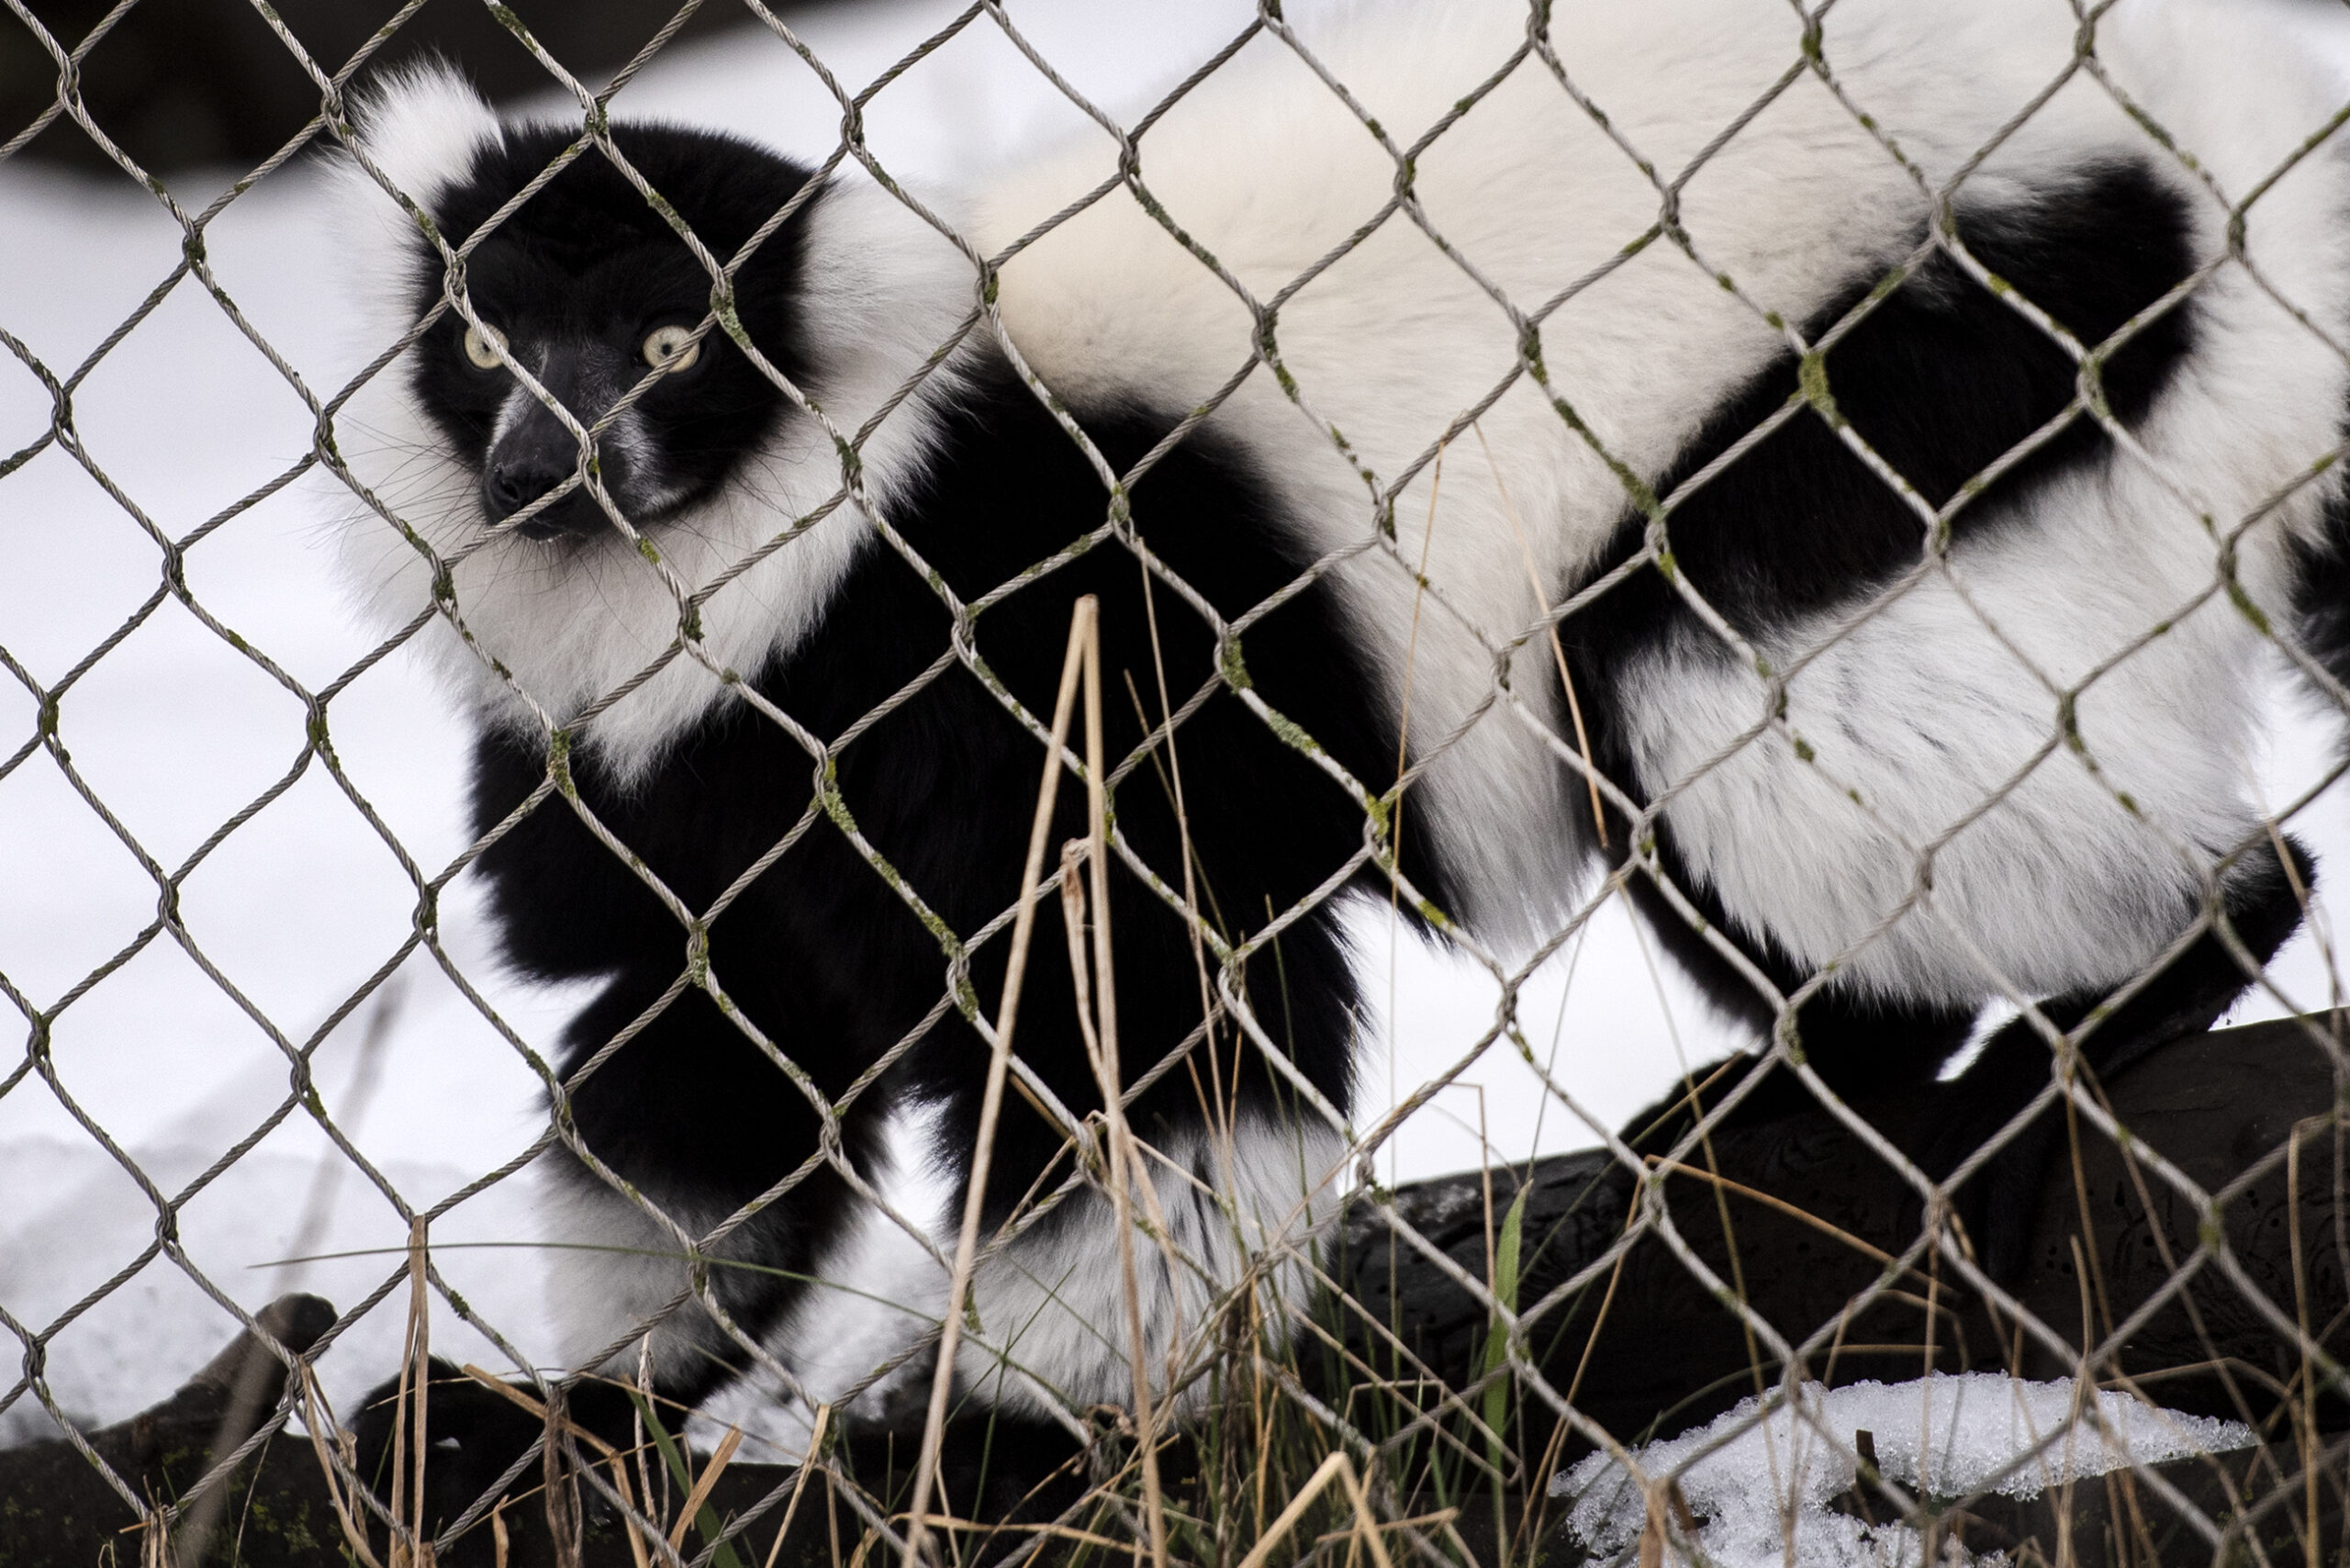 A black and white lemur looks through a wire fence with wide eyes